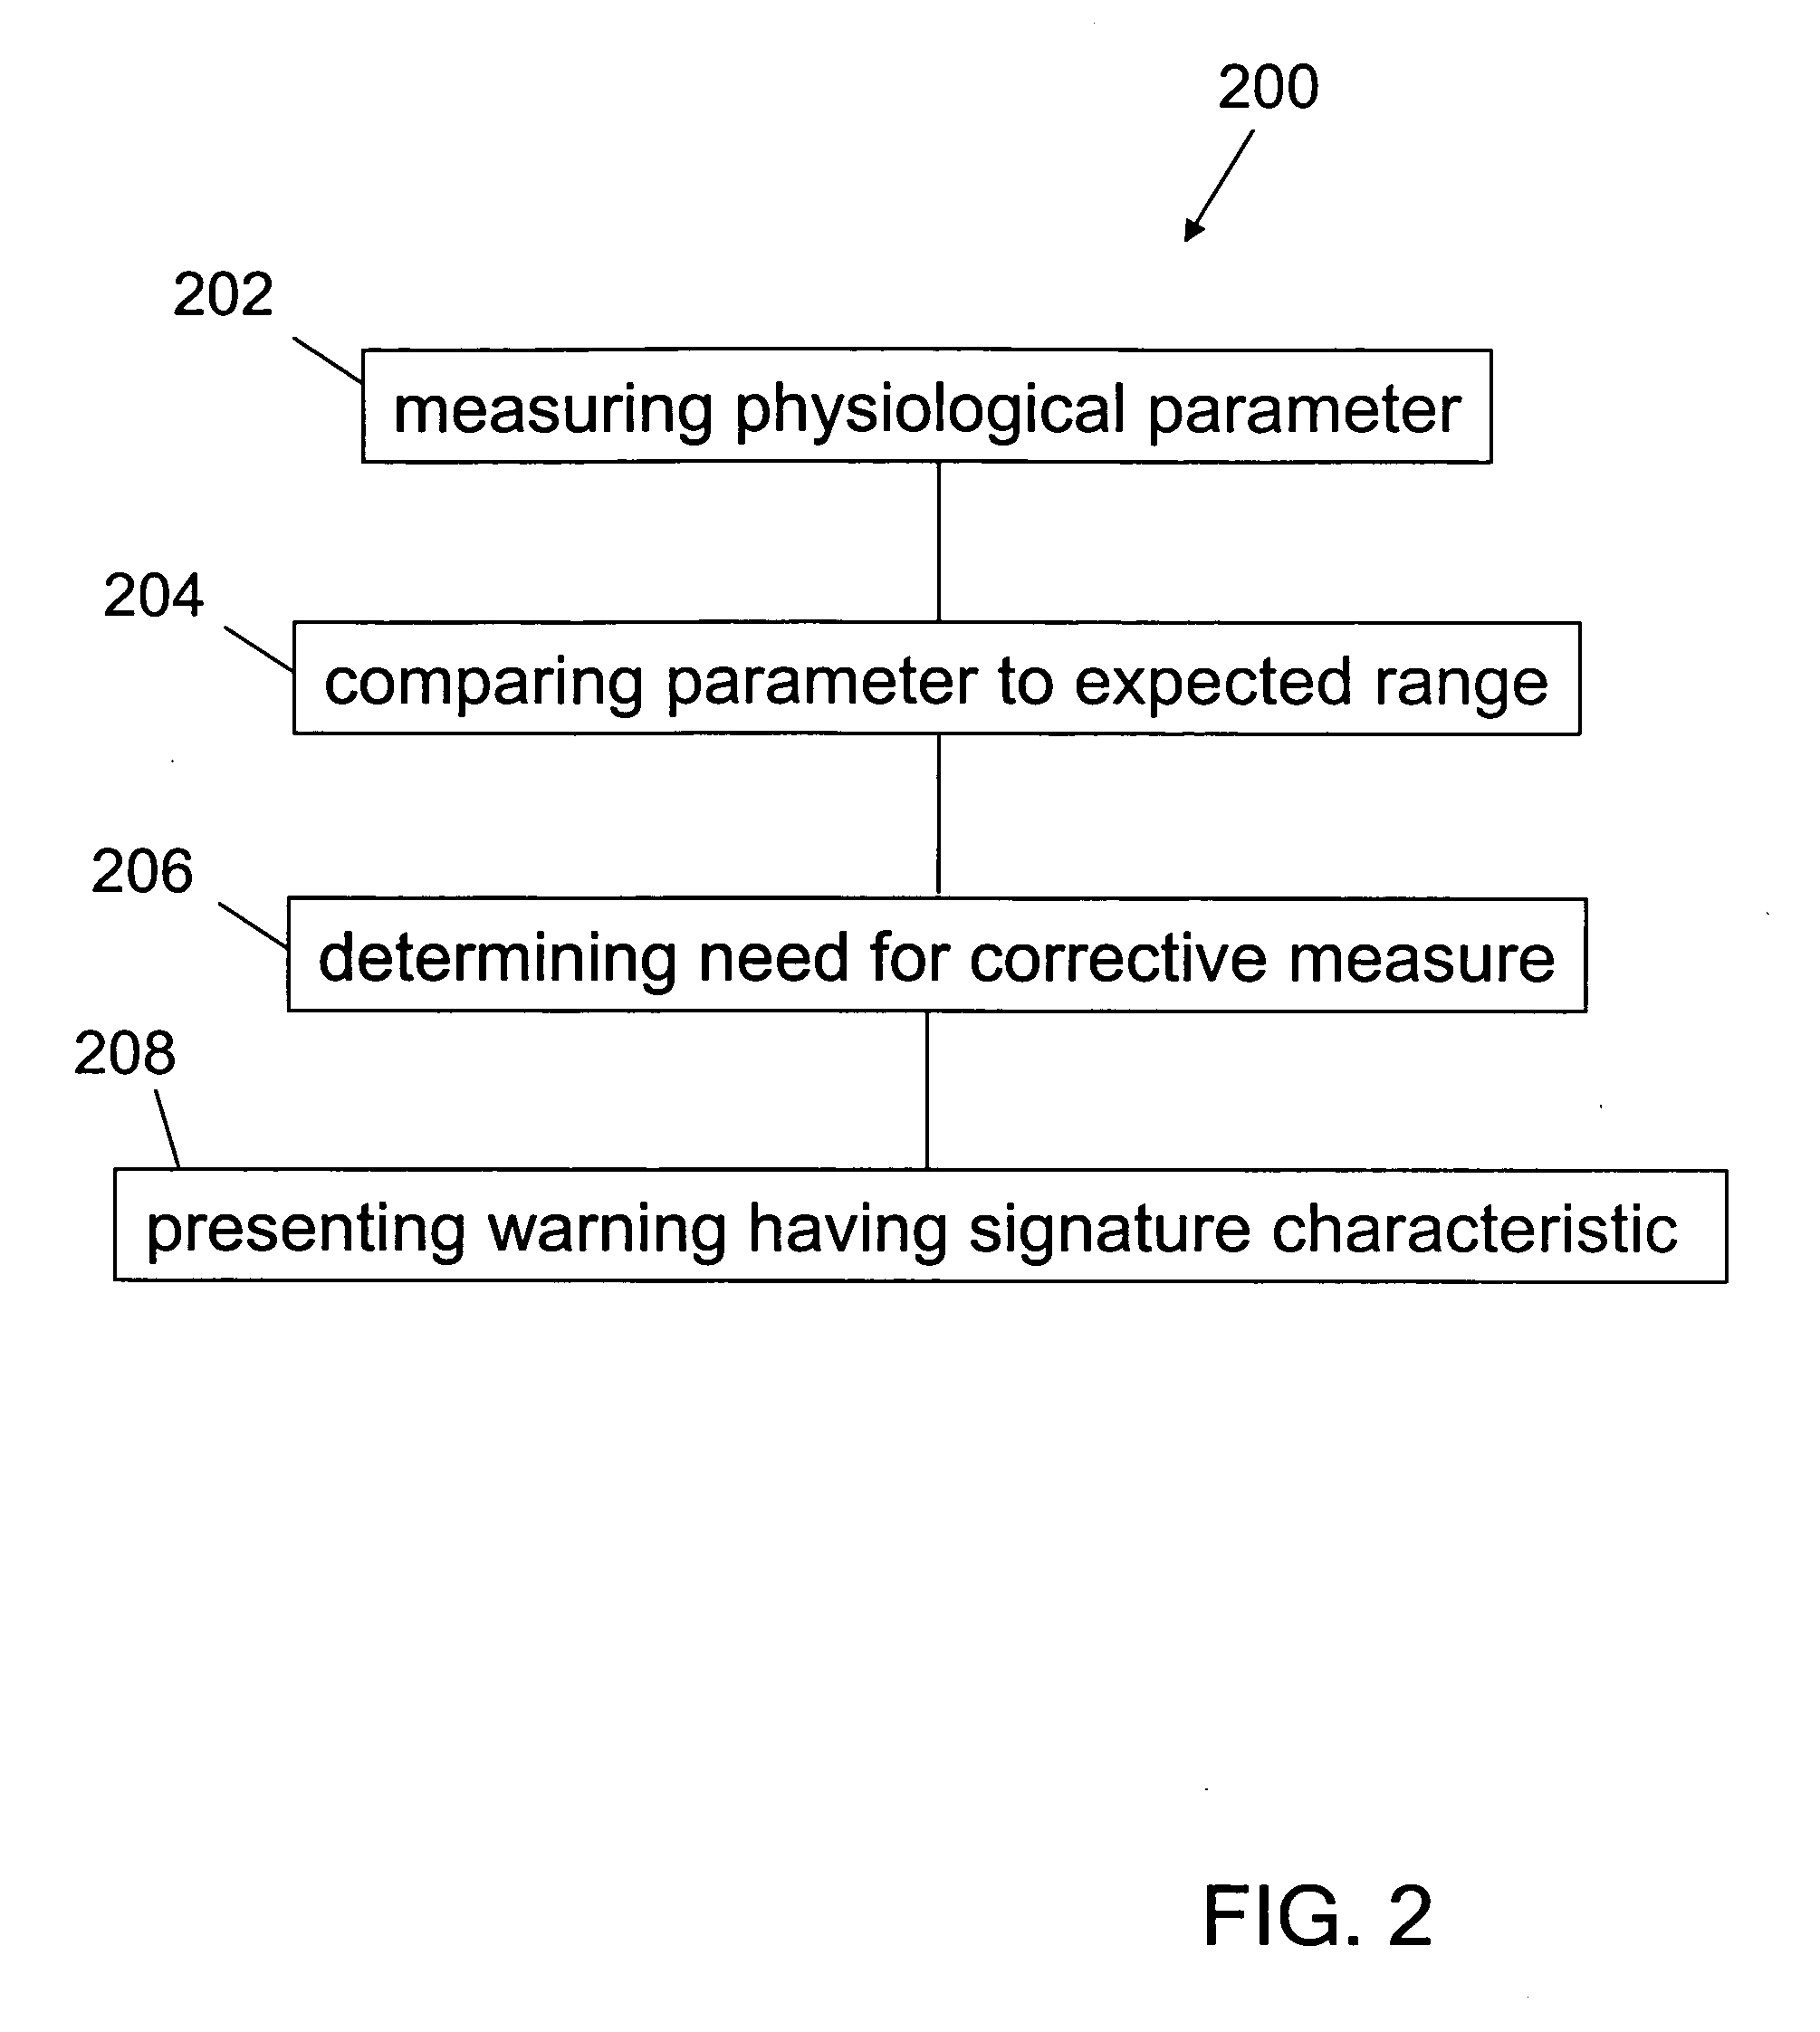 Method for maintaining homeostasis in a health care setting